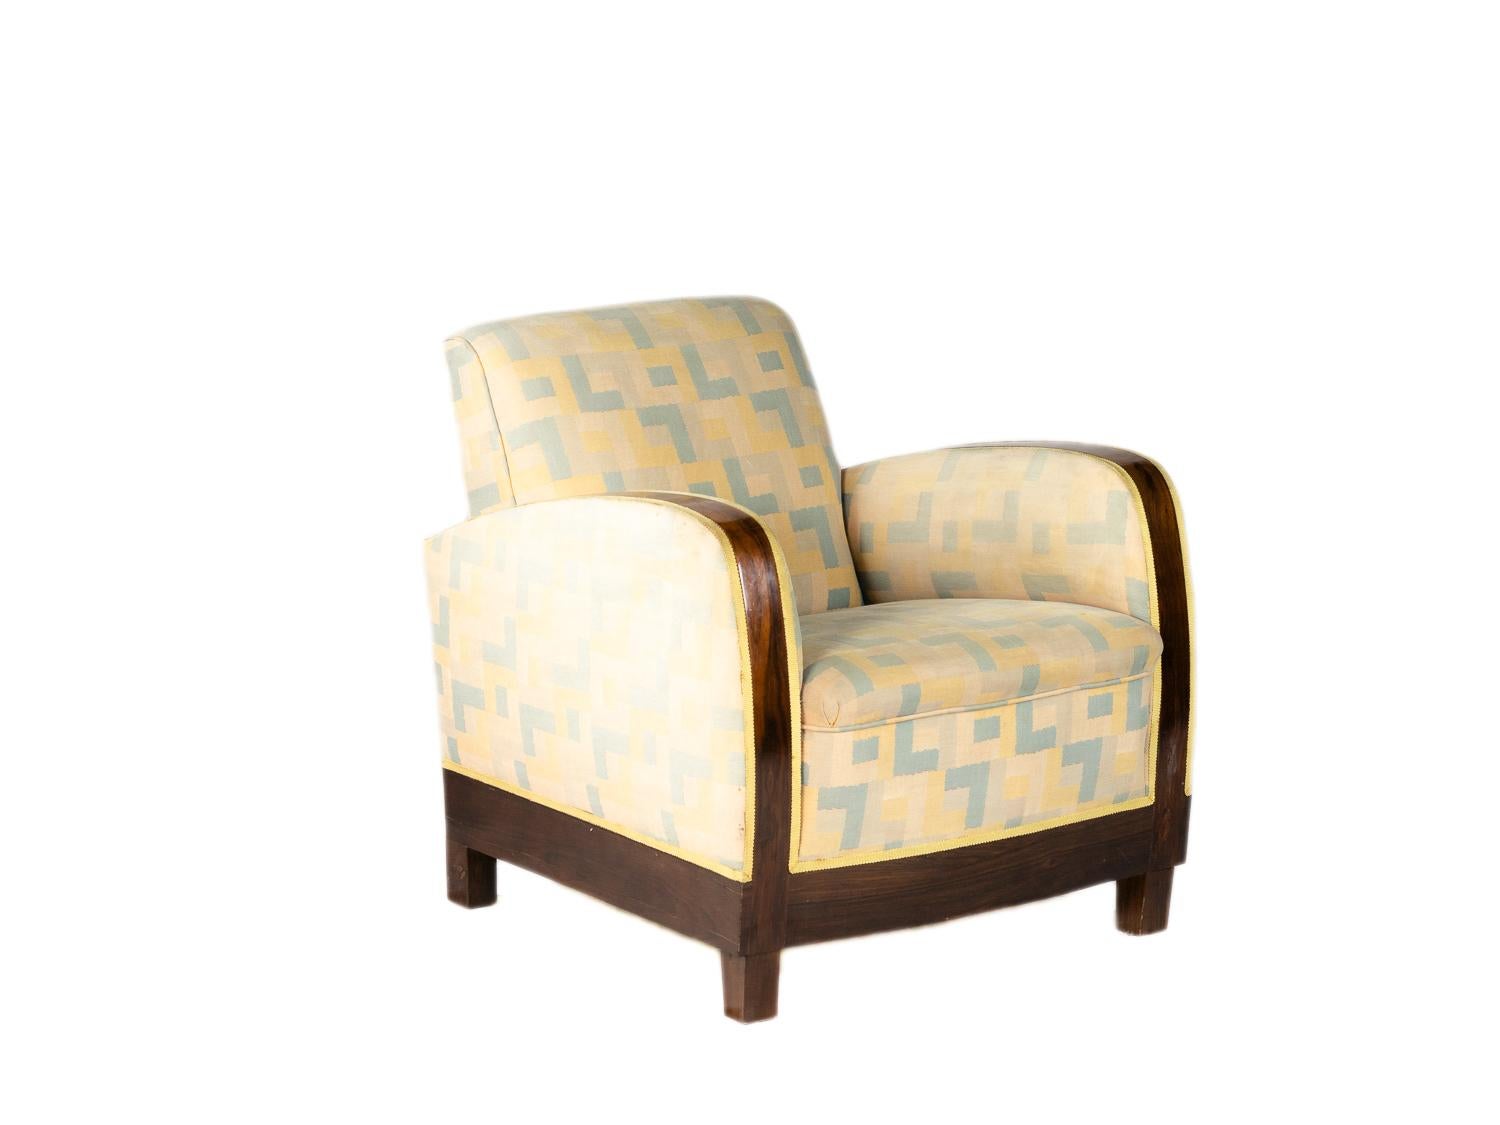 Elegant pair of varnished rosewood parquetry fauteuil sofas with elegant proportions and upholstery polychrome pattern of colors.